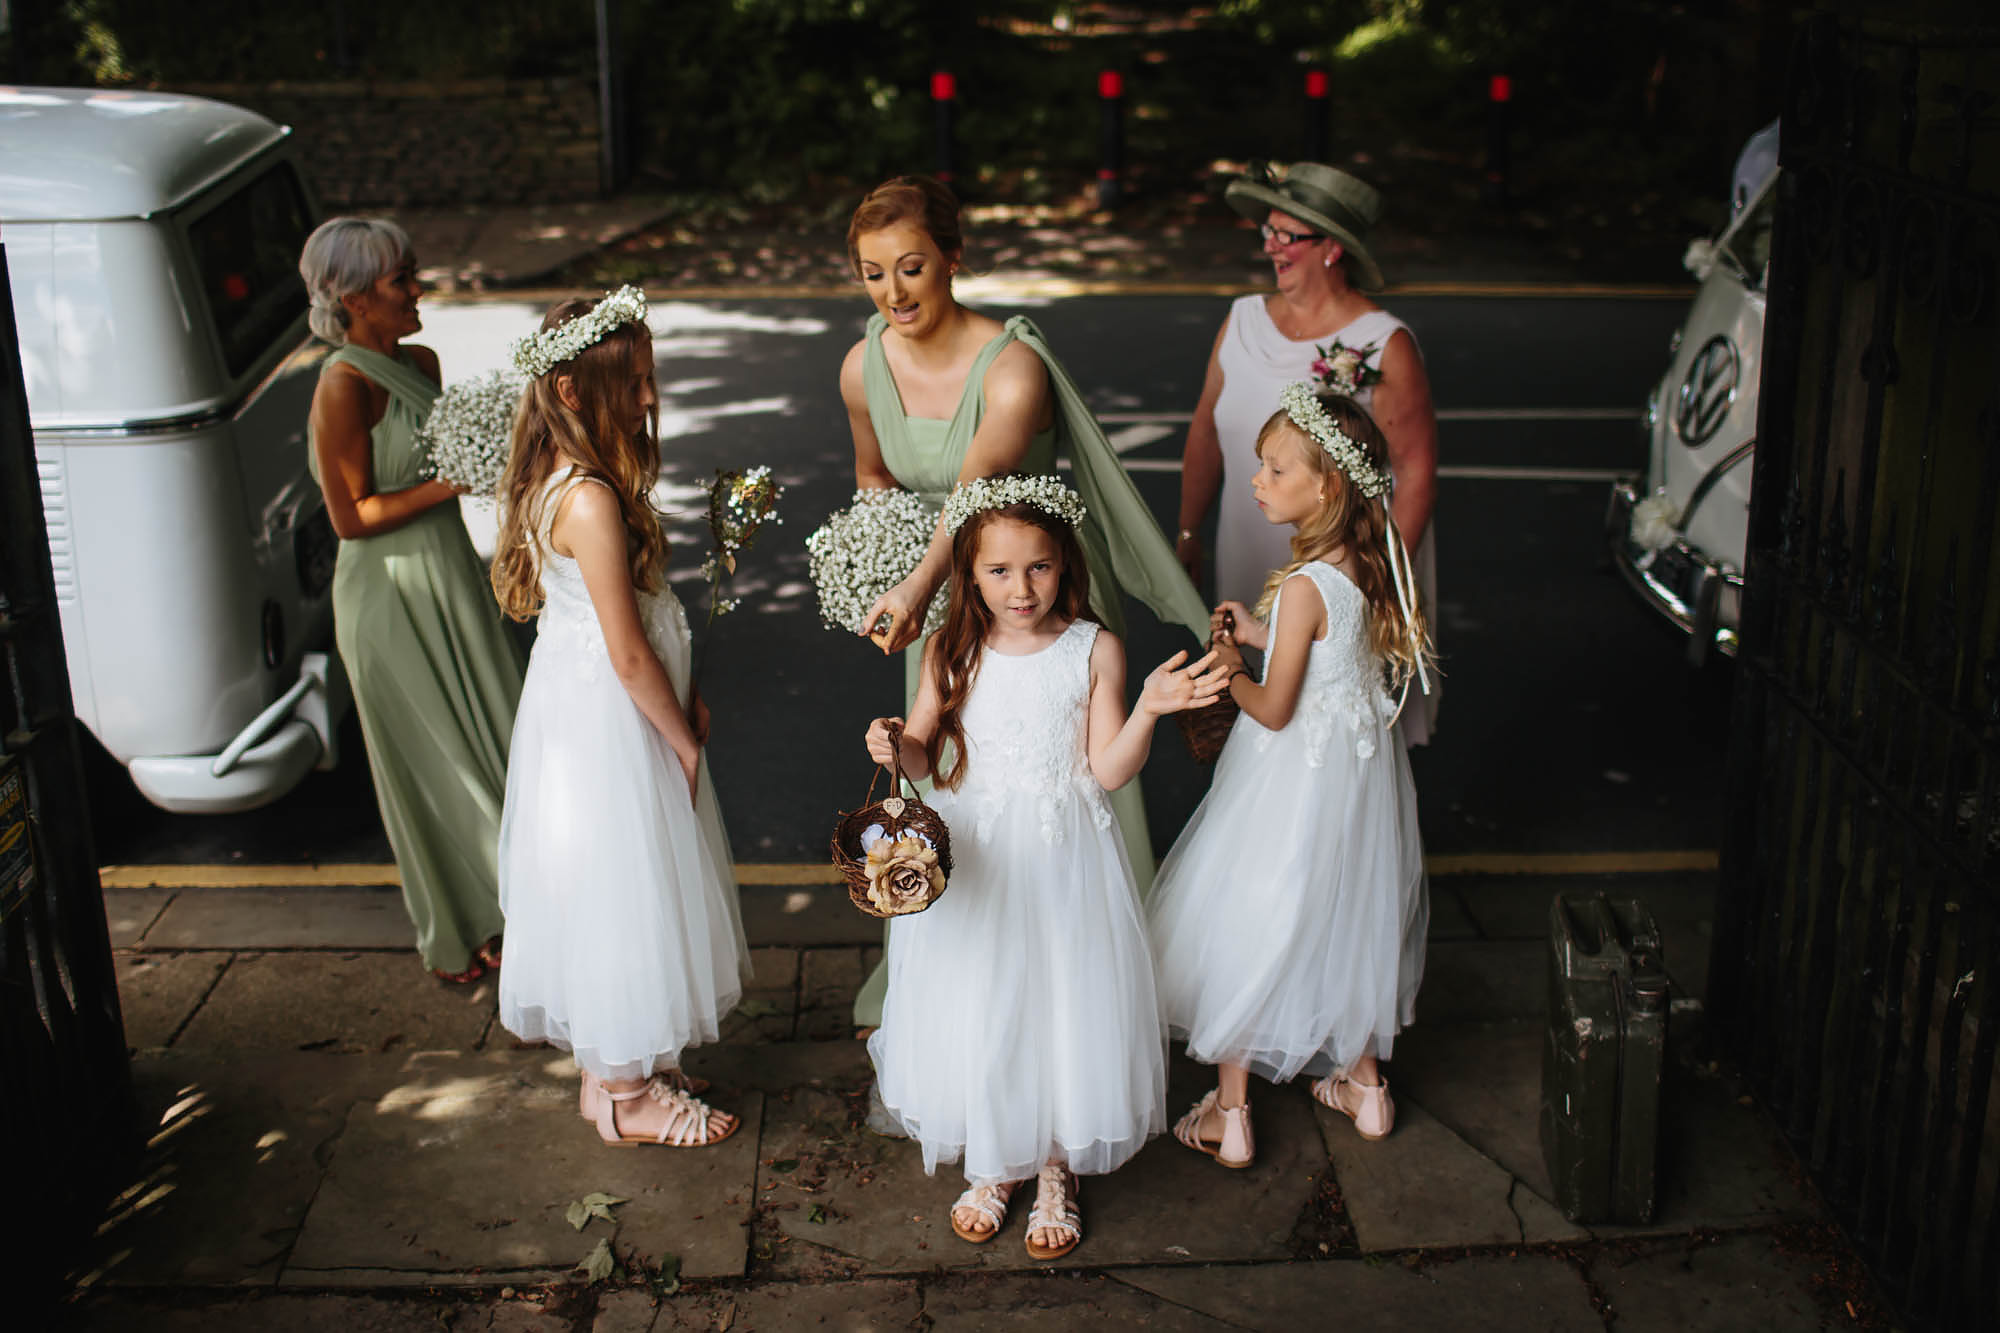 Bridesmaids and flower girls arrive at a wedding in Manchester